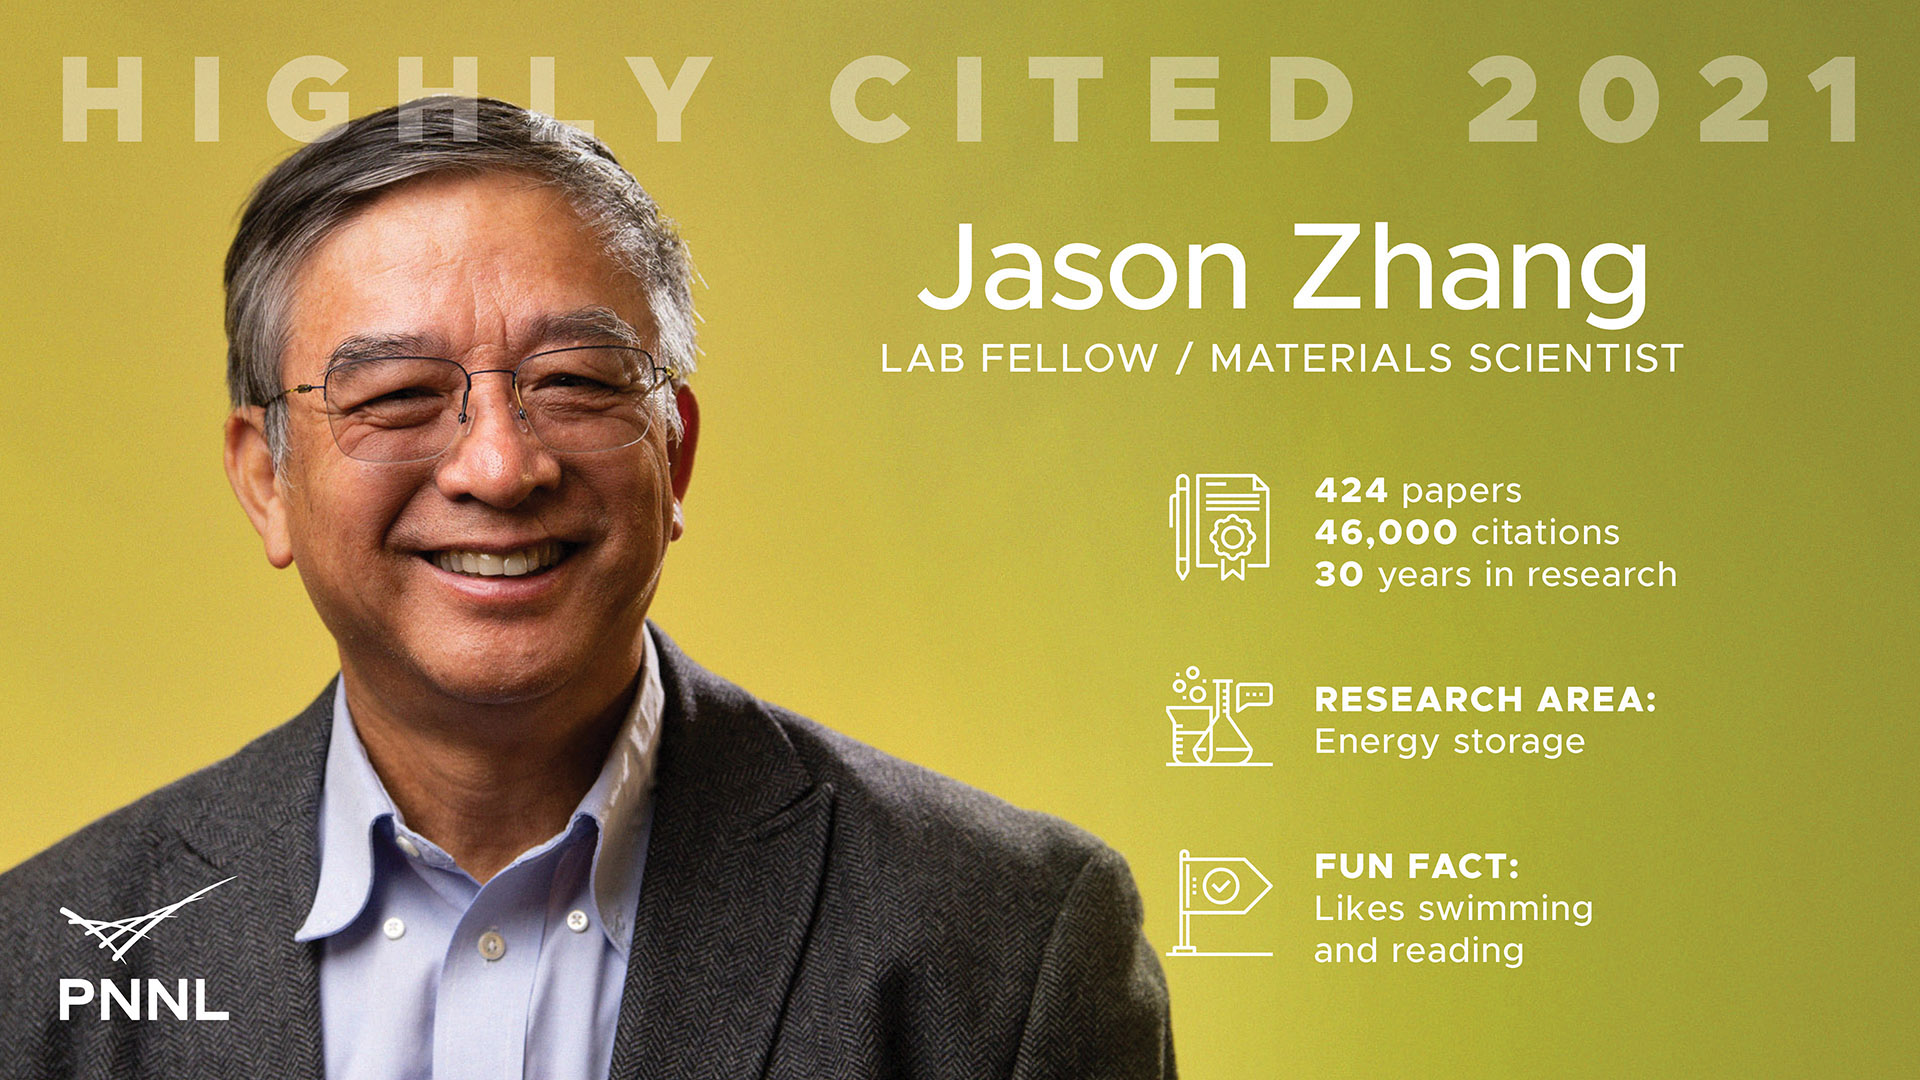 Jason Zhang Highly Cited 2021 Fact Card